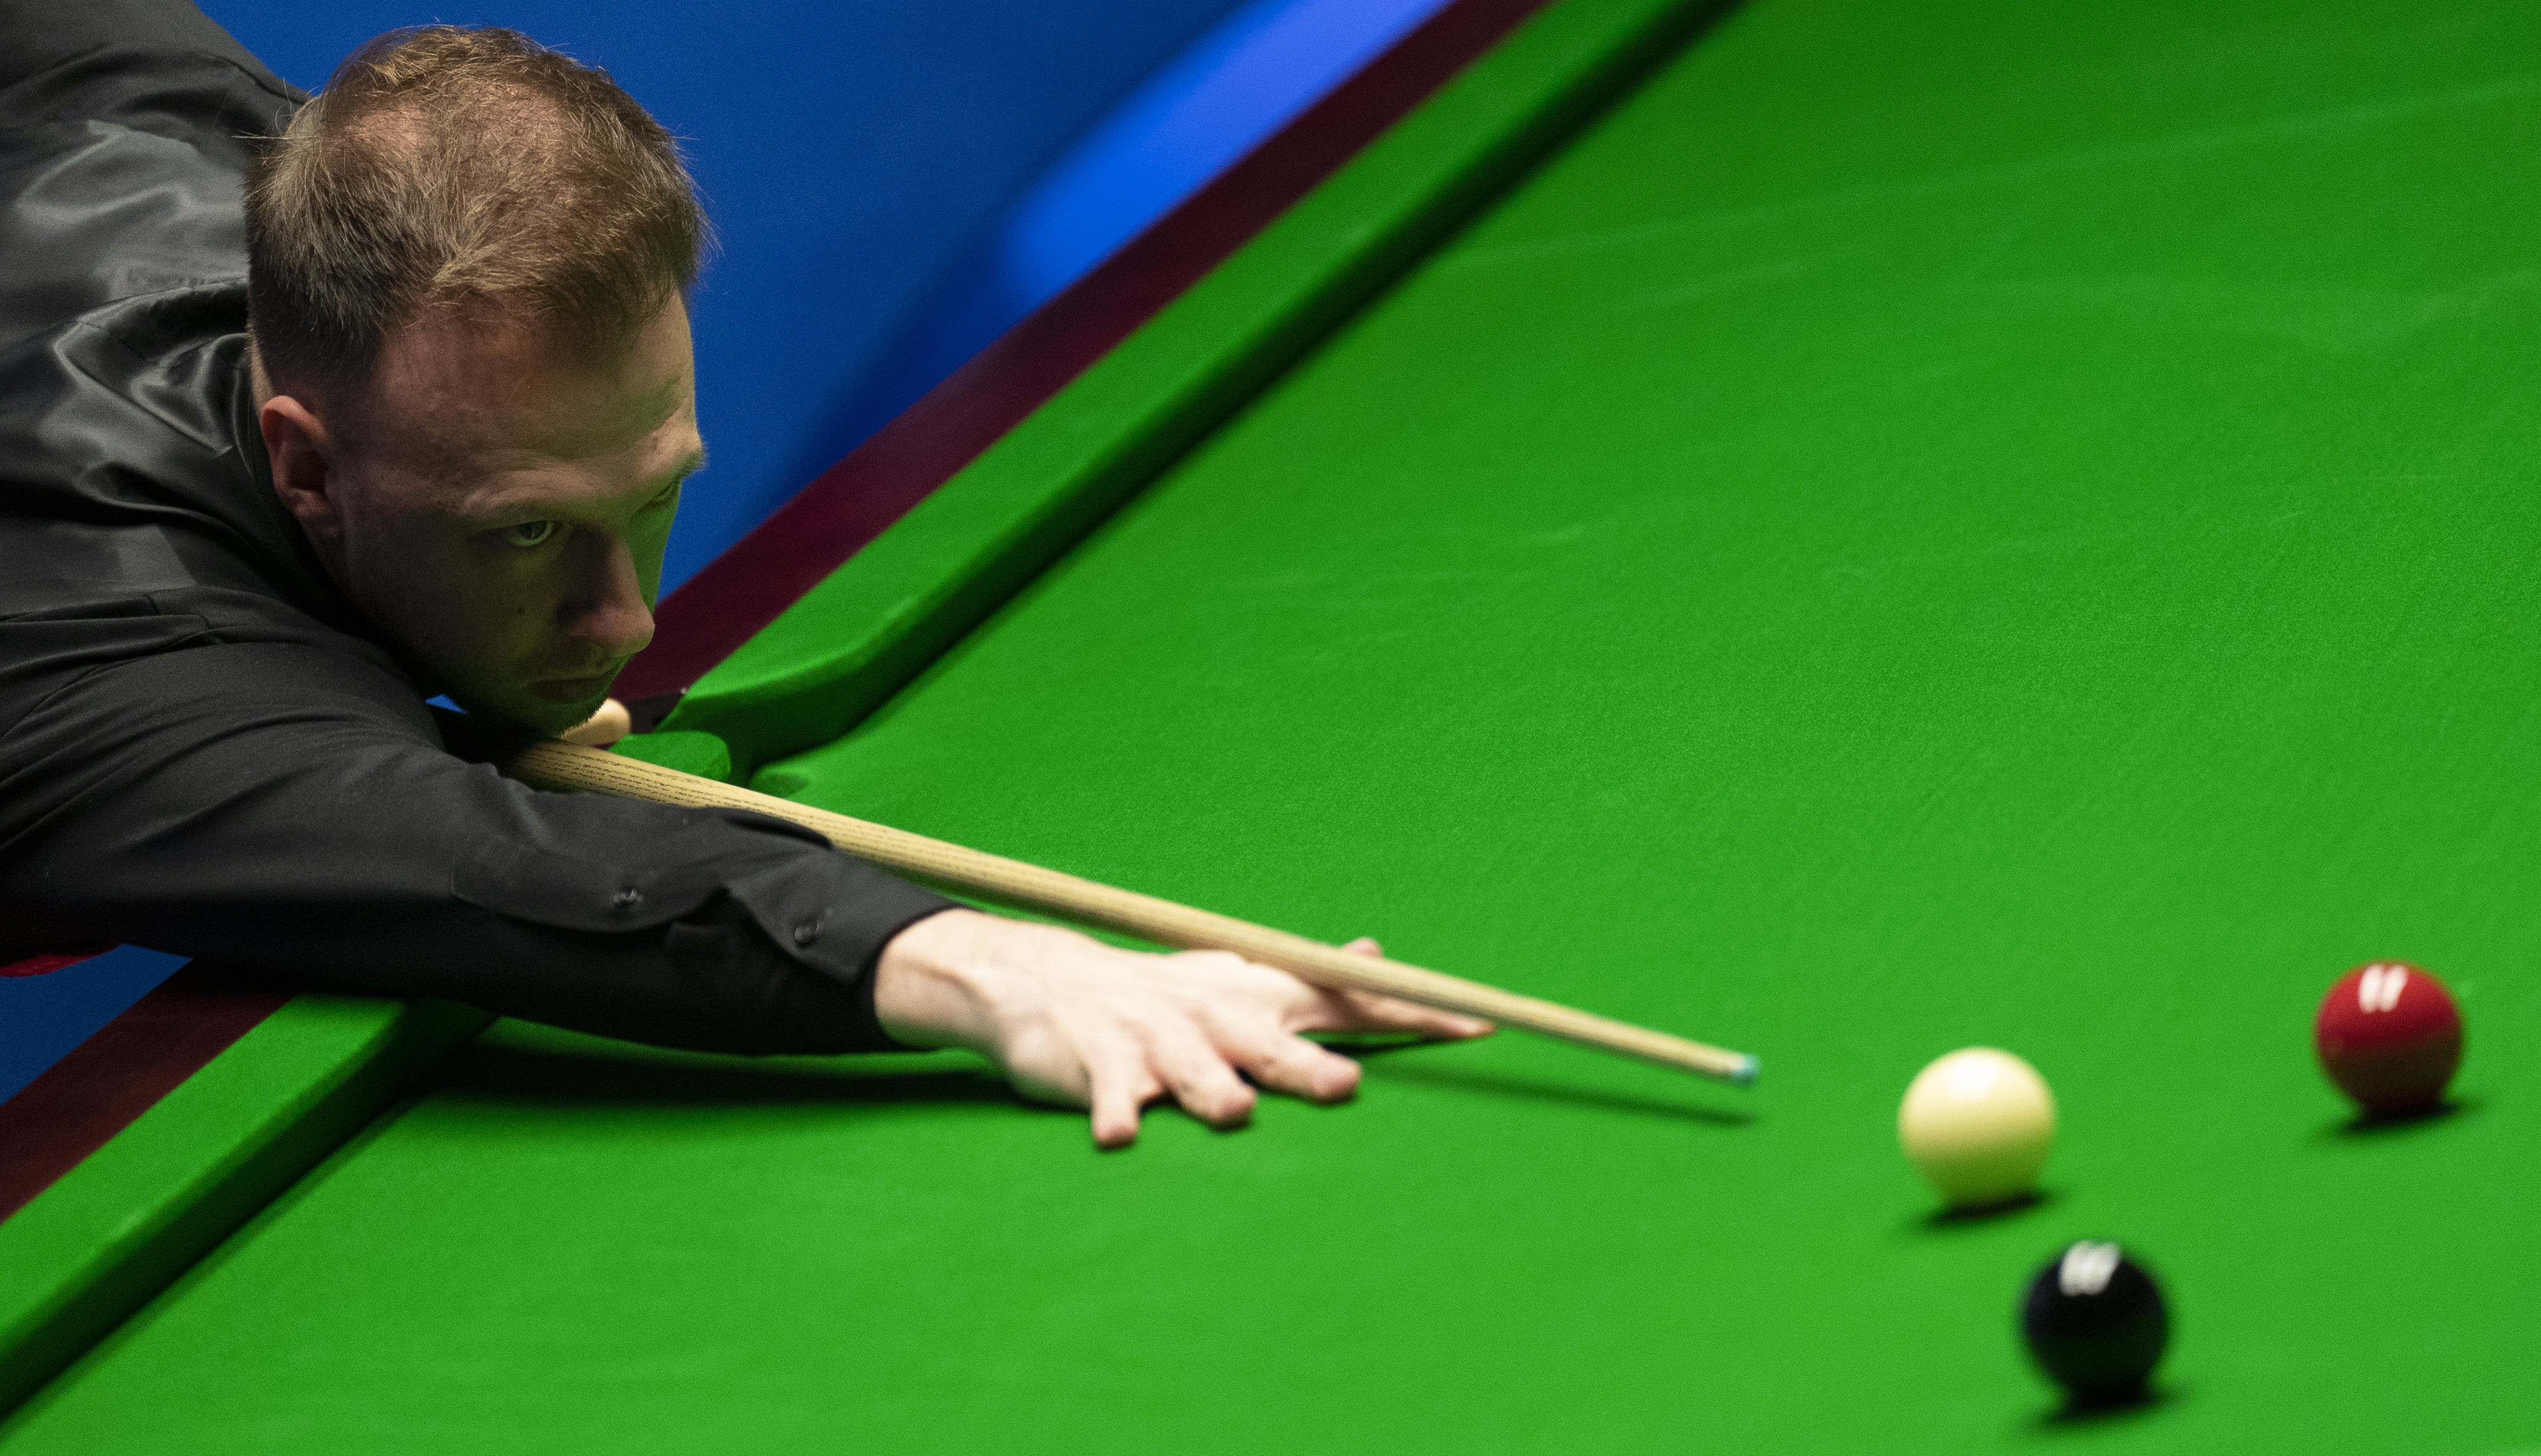 Snooker star Judd Trump sees the funny side as he plays joke on referee The Independent